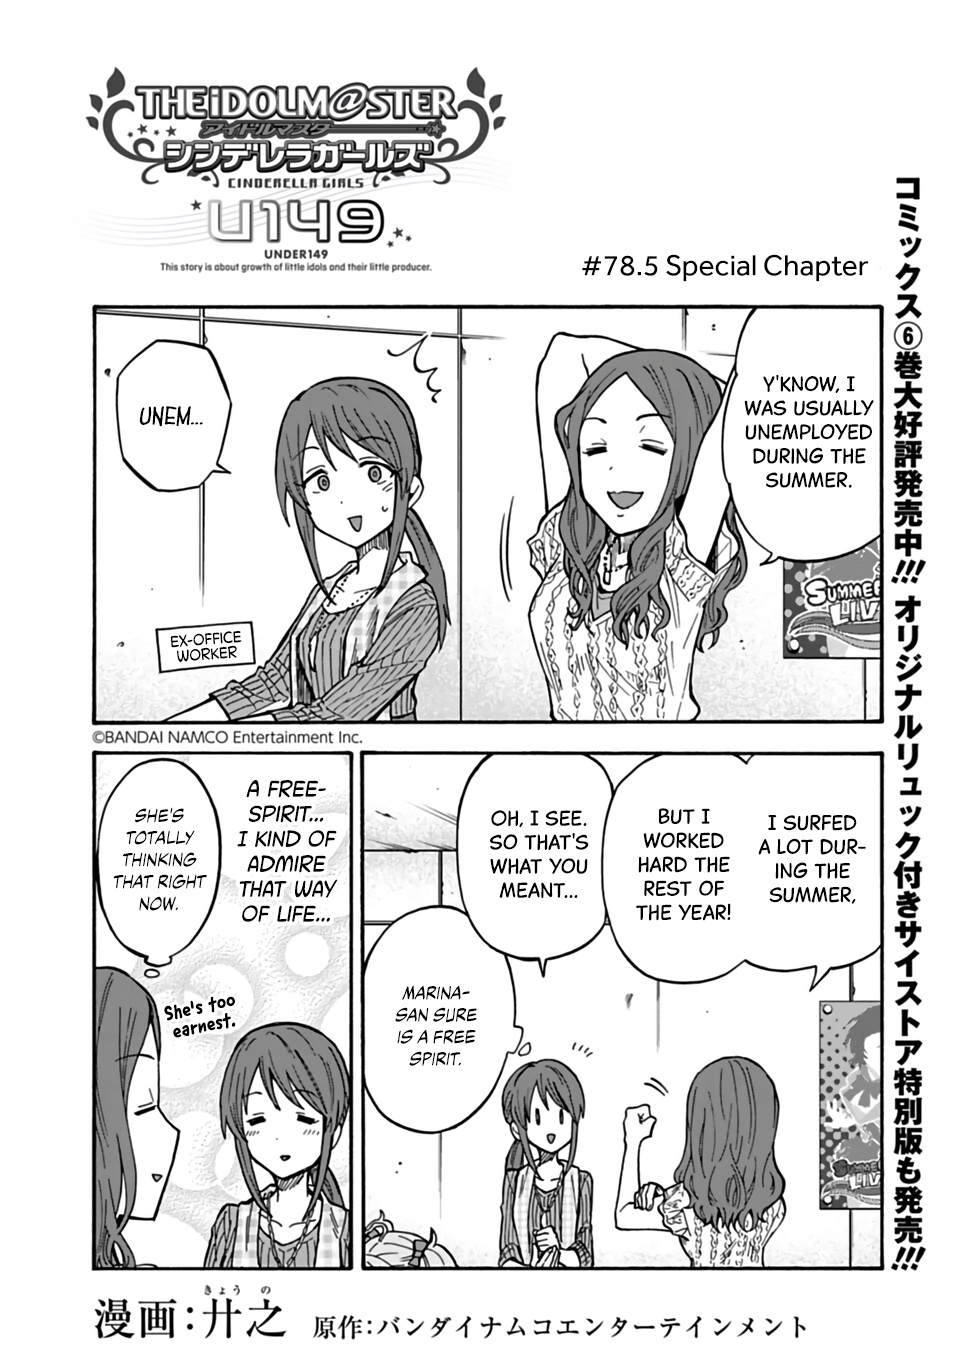 The Idolm@ster Cinderella Girls - U149 Chapter 78.5: Special Compilation - Picture 1